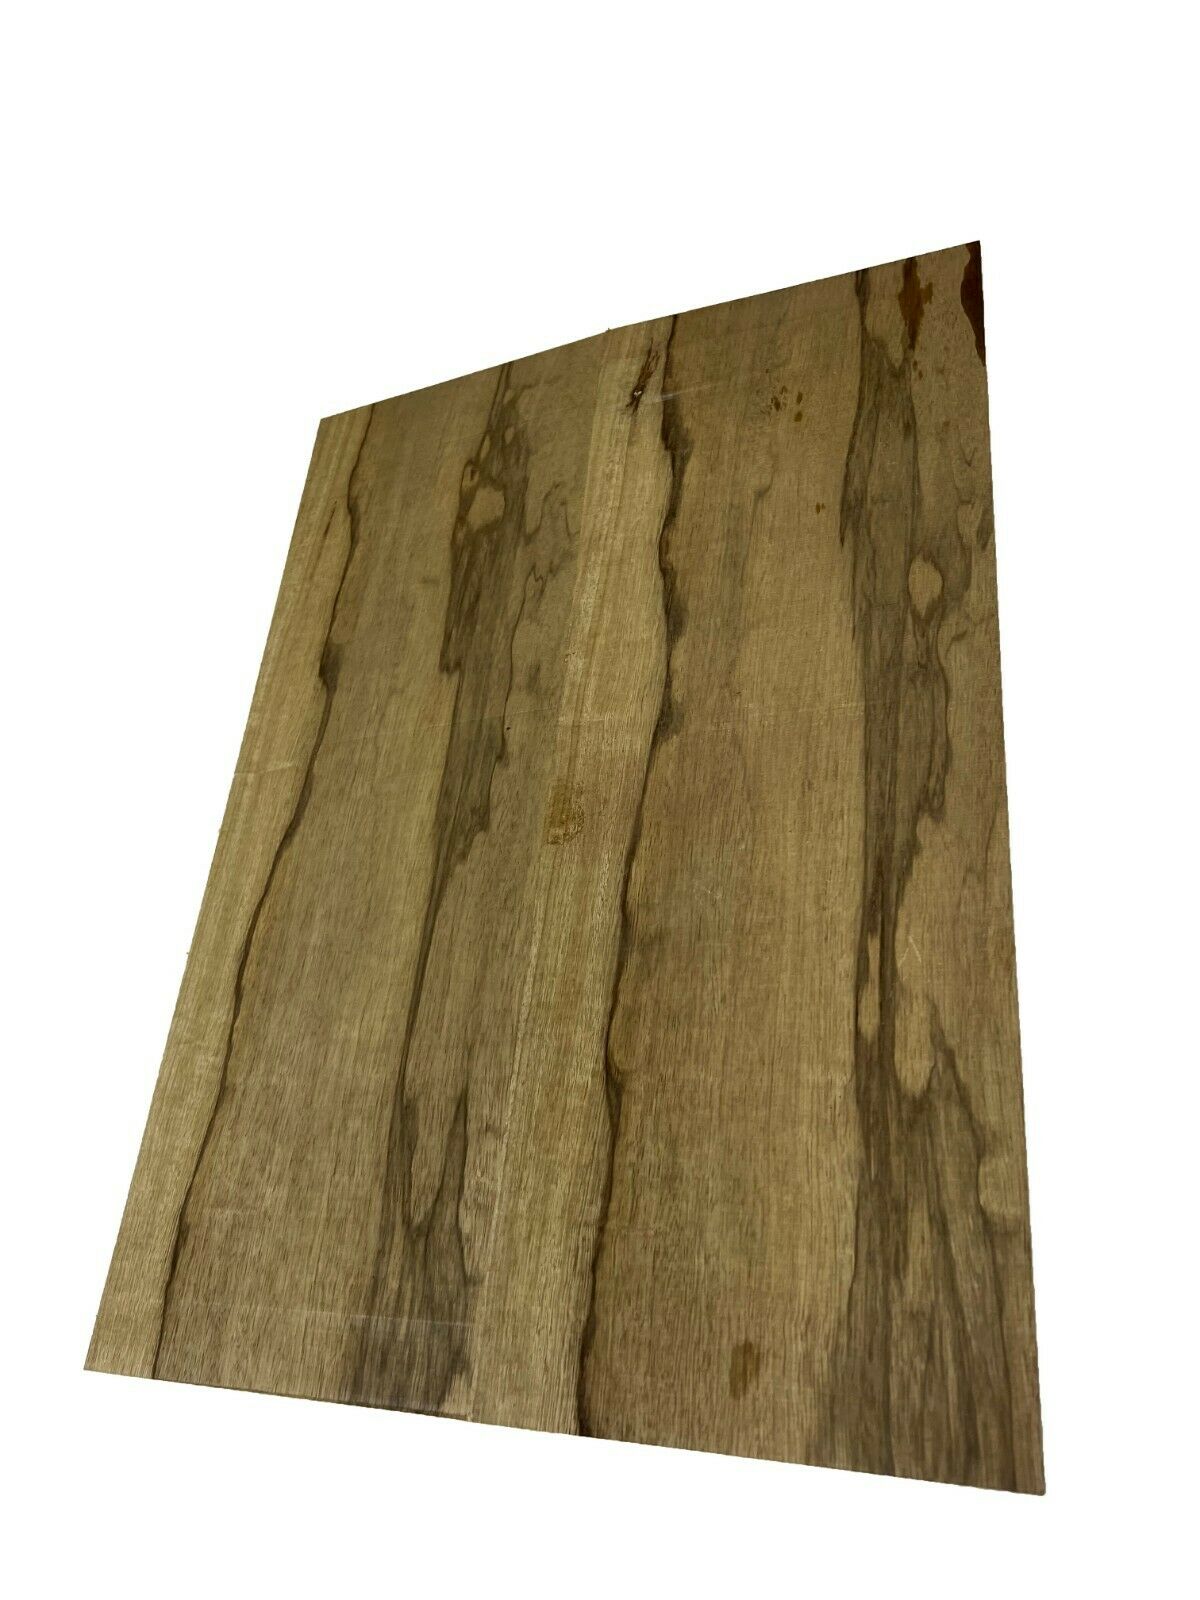 Black Limba Electric Guitar Carved Tops/Plates | 21” x 7” x 5/8” | Book Matched Sets - Exotic Wood Zone - Buy online Across USA